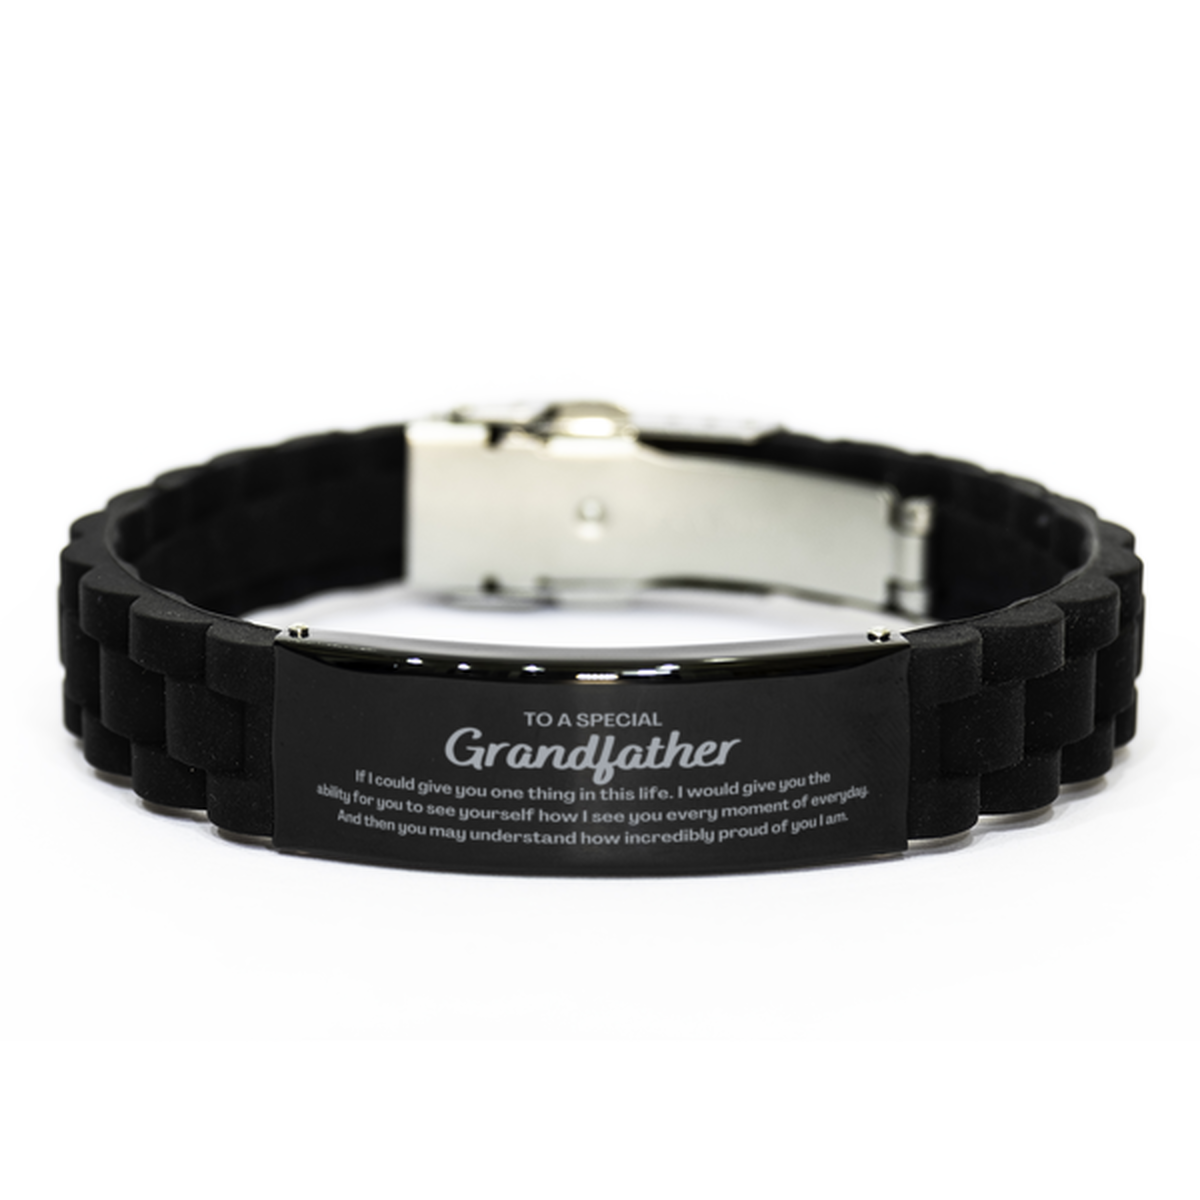 To My Grandfather Black Glidelock Clasp Bracelet, Gifts For Grandfather Engraved, Inspirational Gifts for Christmas Birthday, Epic Gifts for Grandfather To A Special Grandfather how incredibly proud of you I am